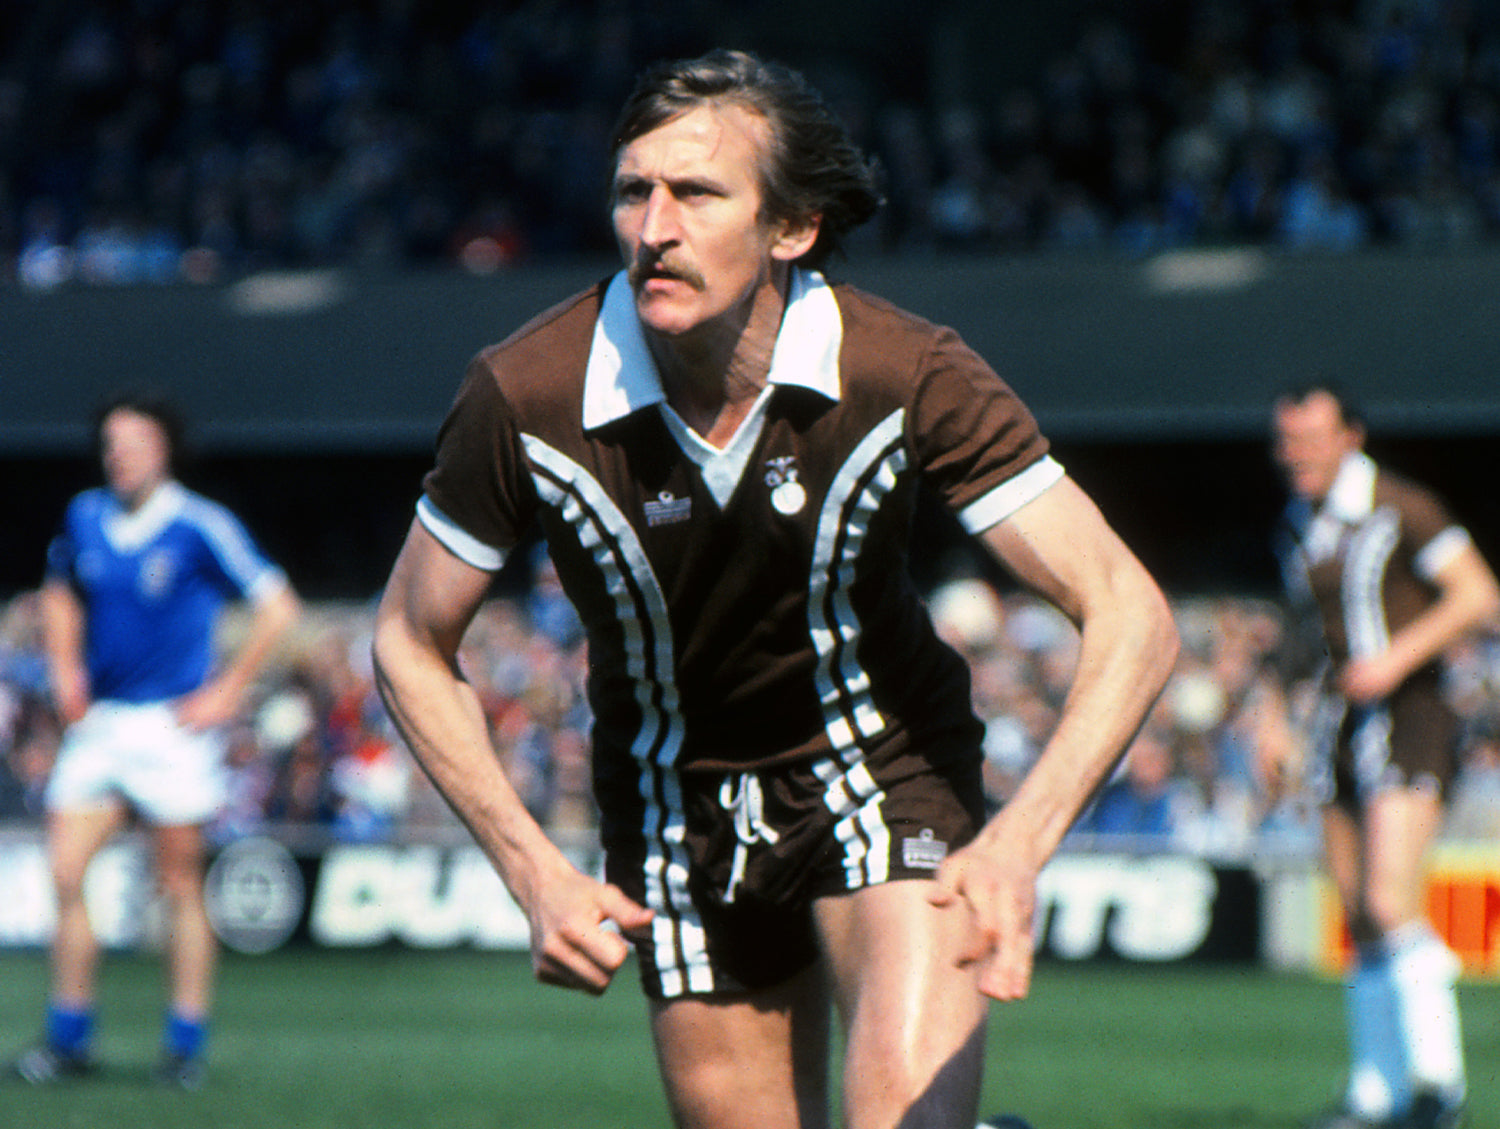 Coventry City Chocolate Brown kit by Admiral